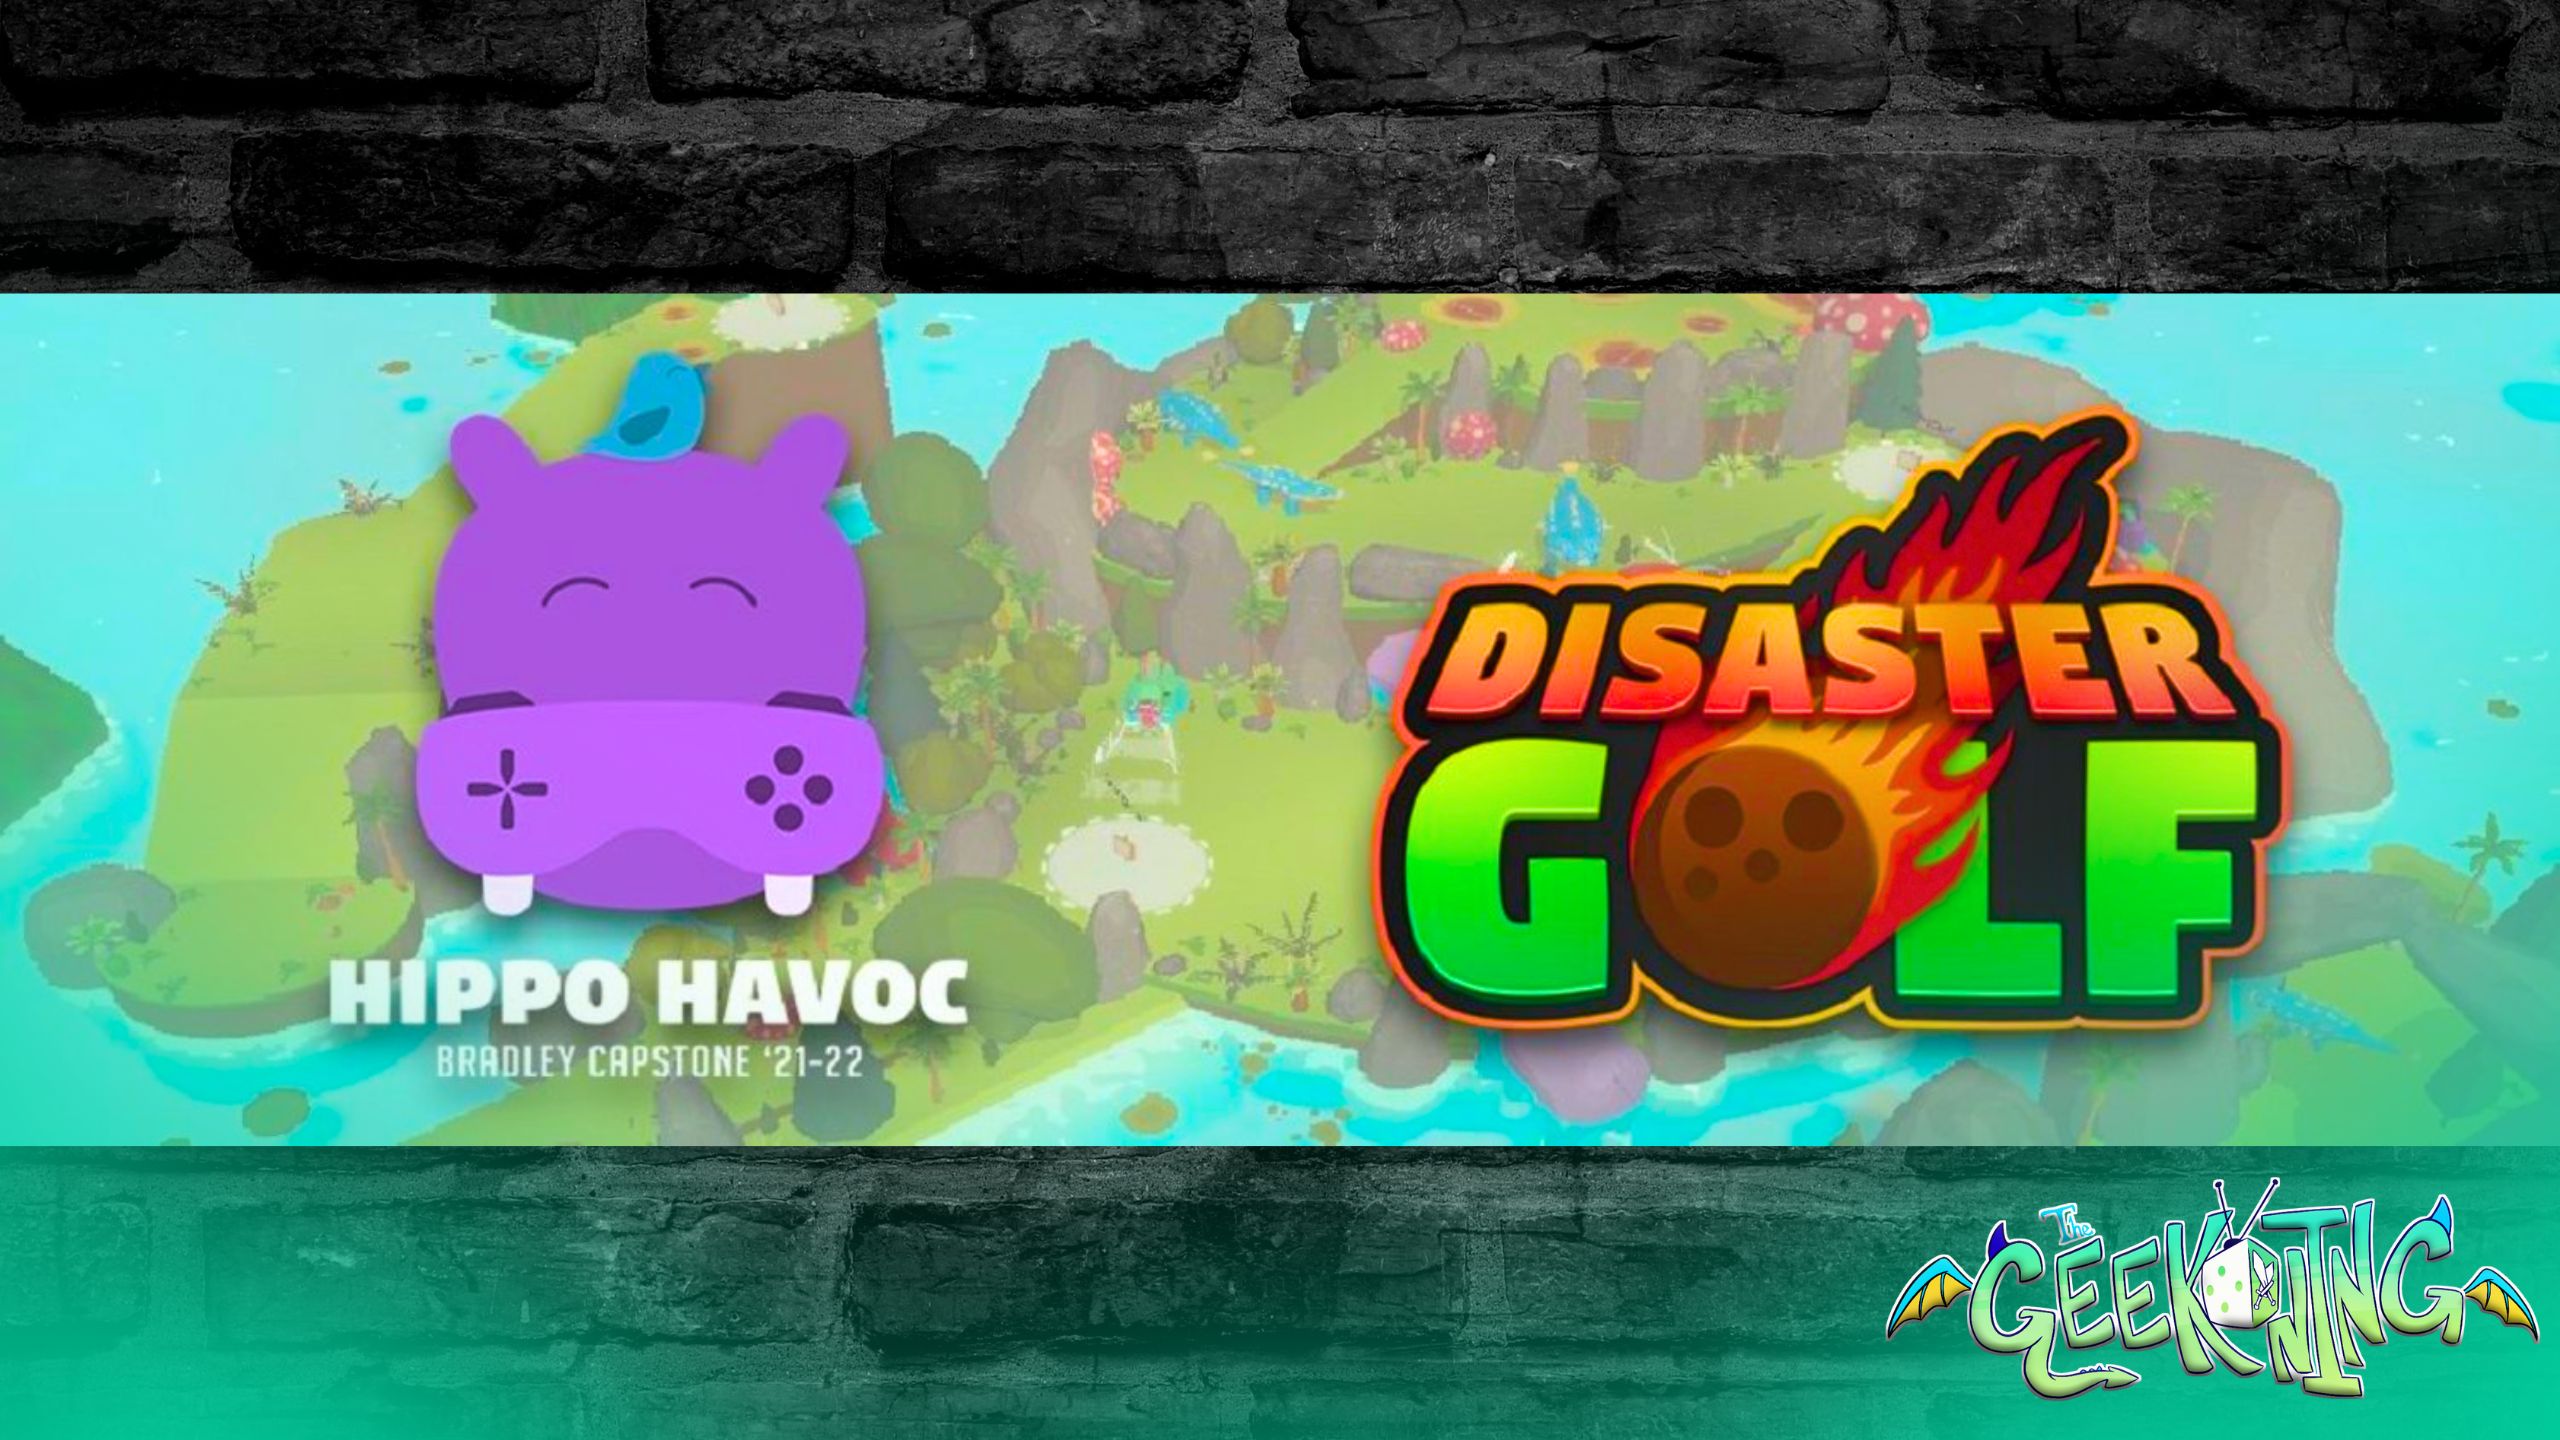 An Interview with Hippo Havoc the Creators of Disaster Golf | The Geekoning Podcast